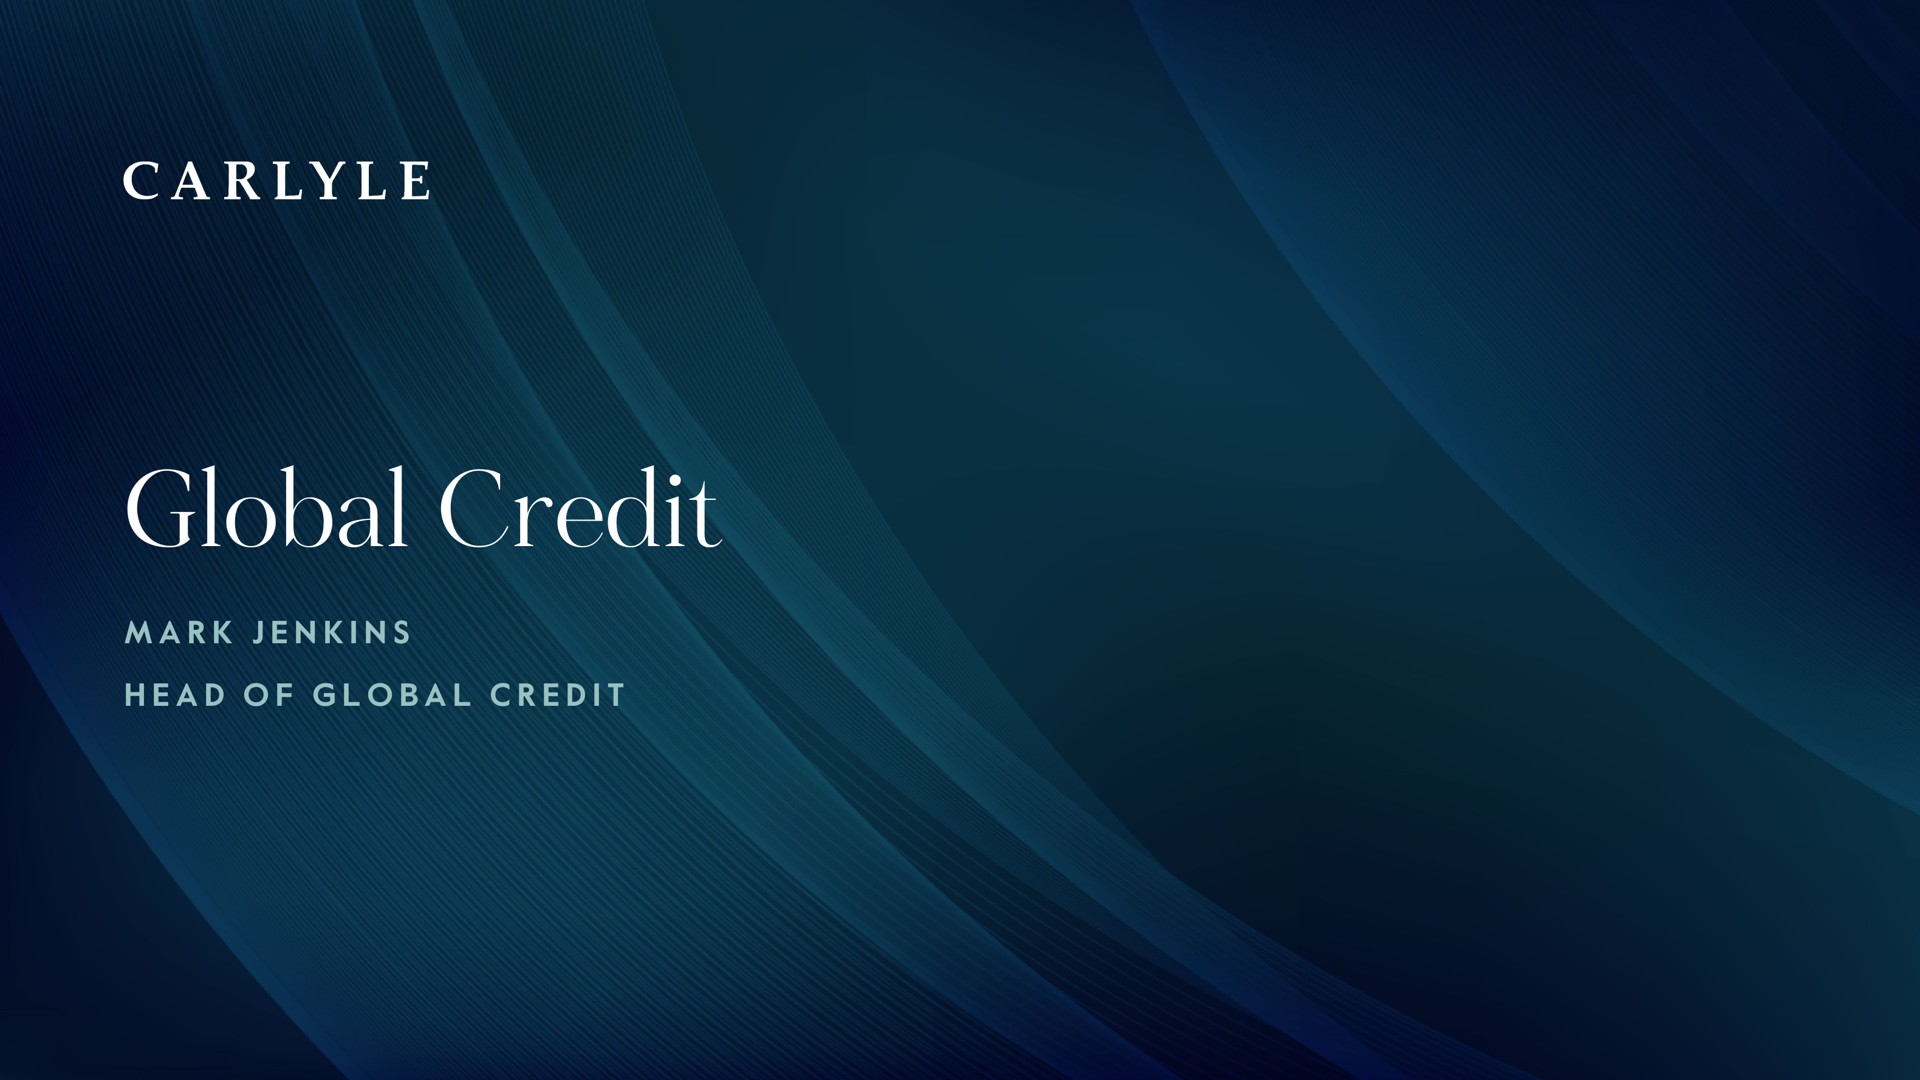 global credit | Carlyle